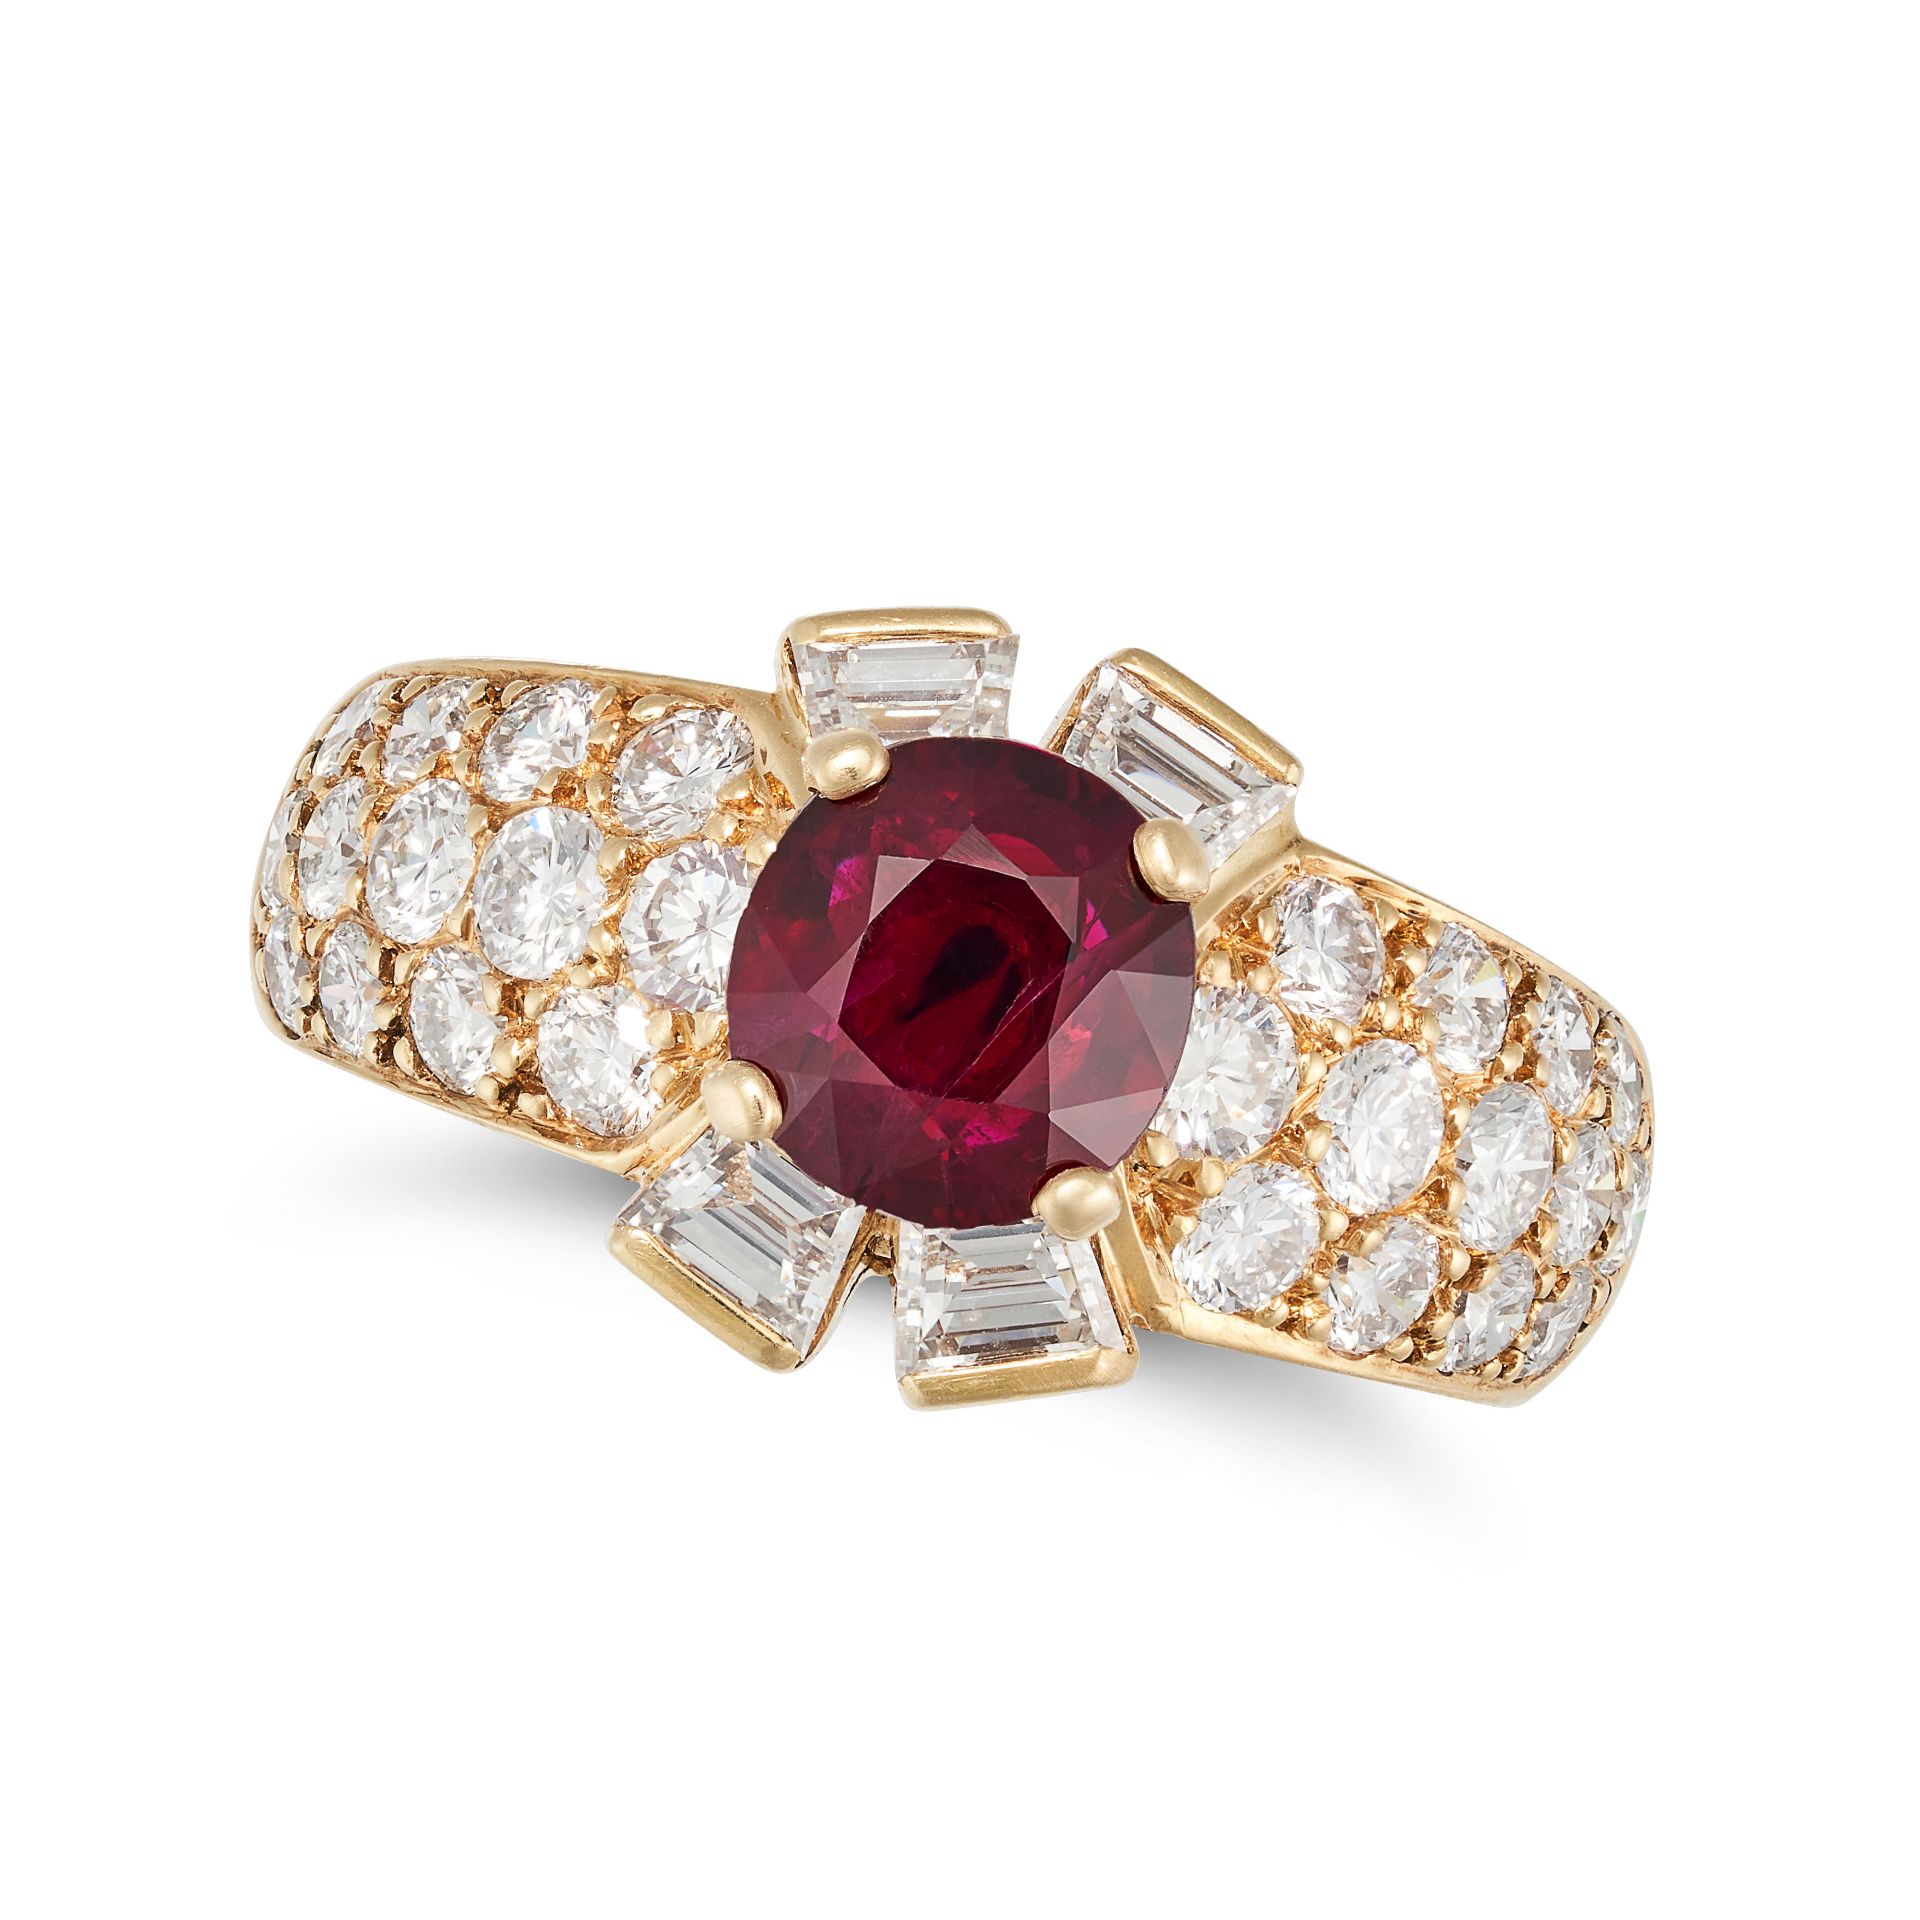 VAN CLEEF & ARPELS, A PIGEON'S BLOOD BURMA NO HEAT RUBY AND DIAMOND RING in 18ct yellow gold, set...